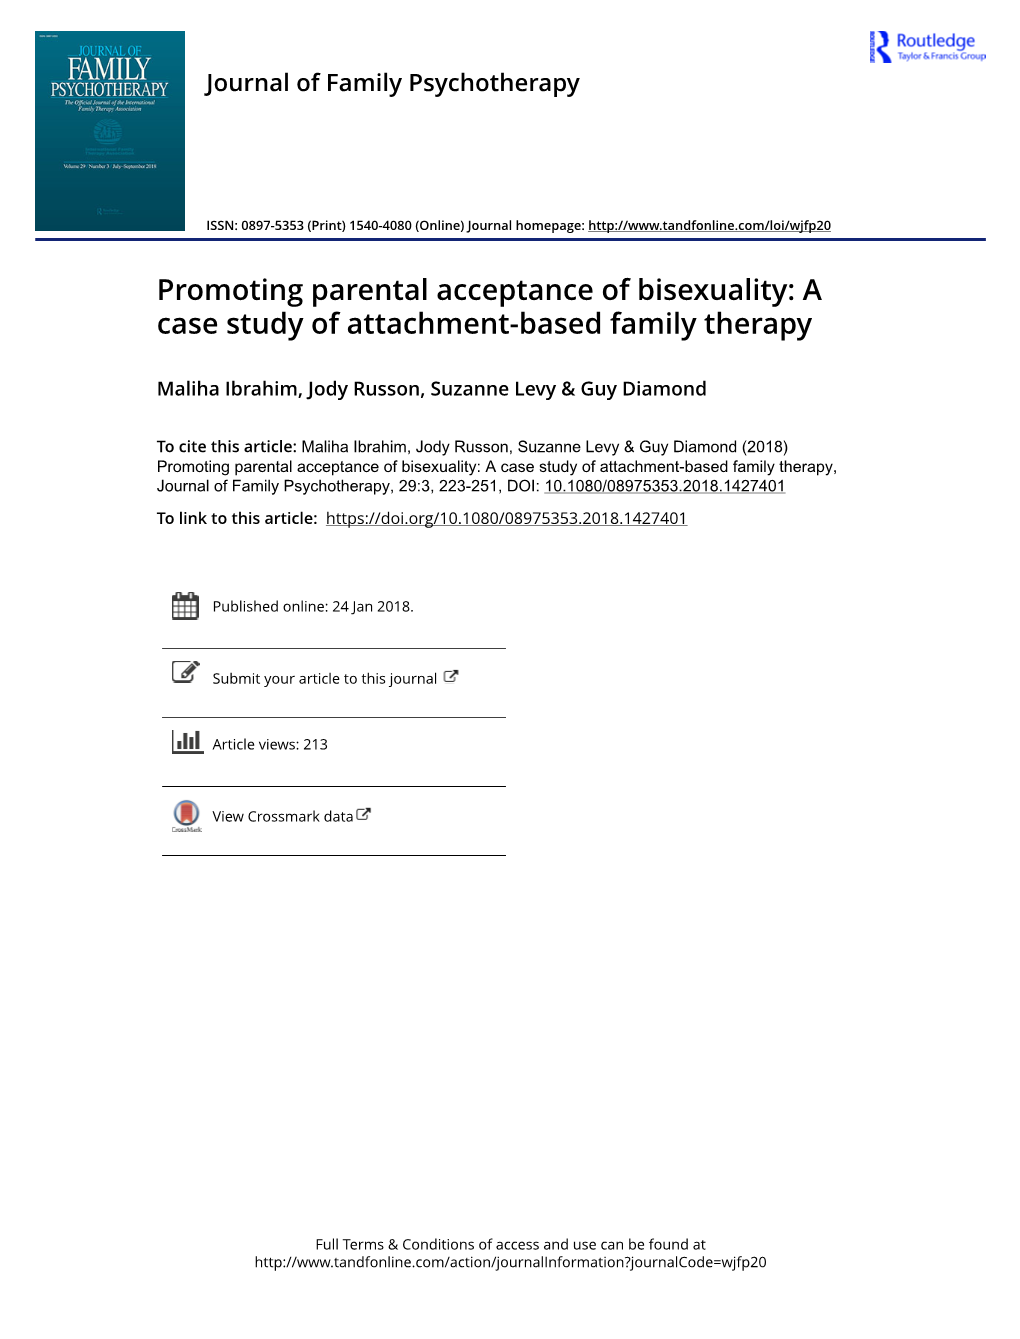 A Case Study of Attachment-Based Family Therapy